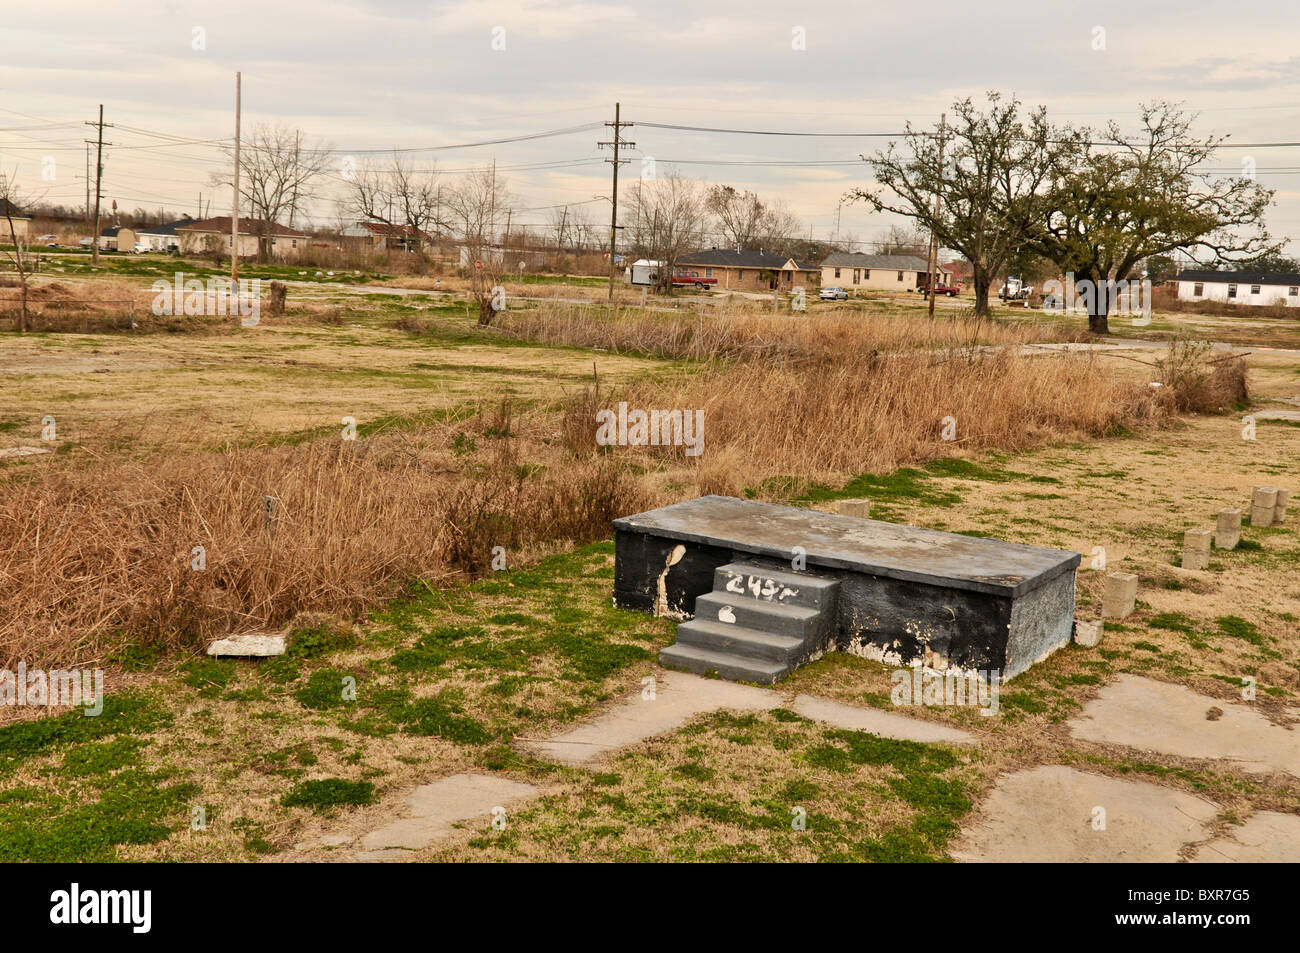 All that remains in an entire block in Lower 9th Ward after Hurricane Katrina flood, New Orleans, Louisiana Stock Photo